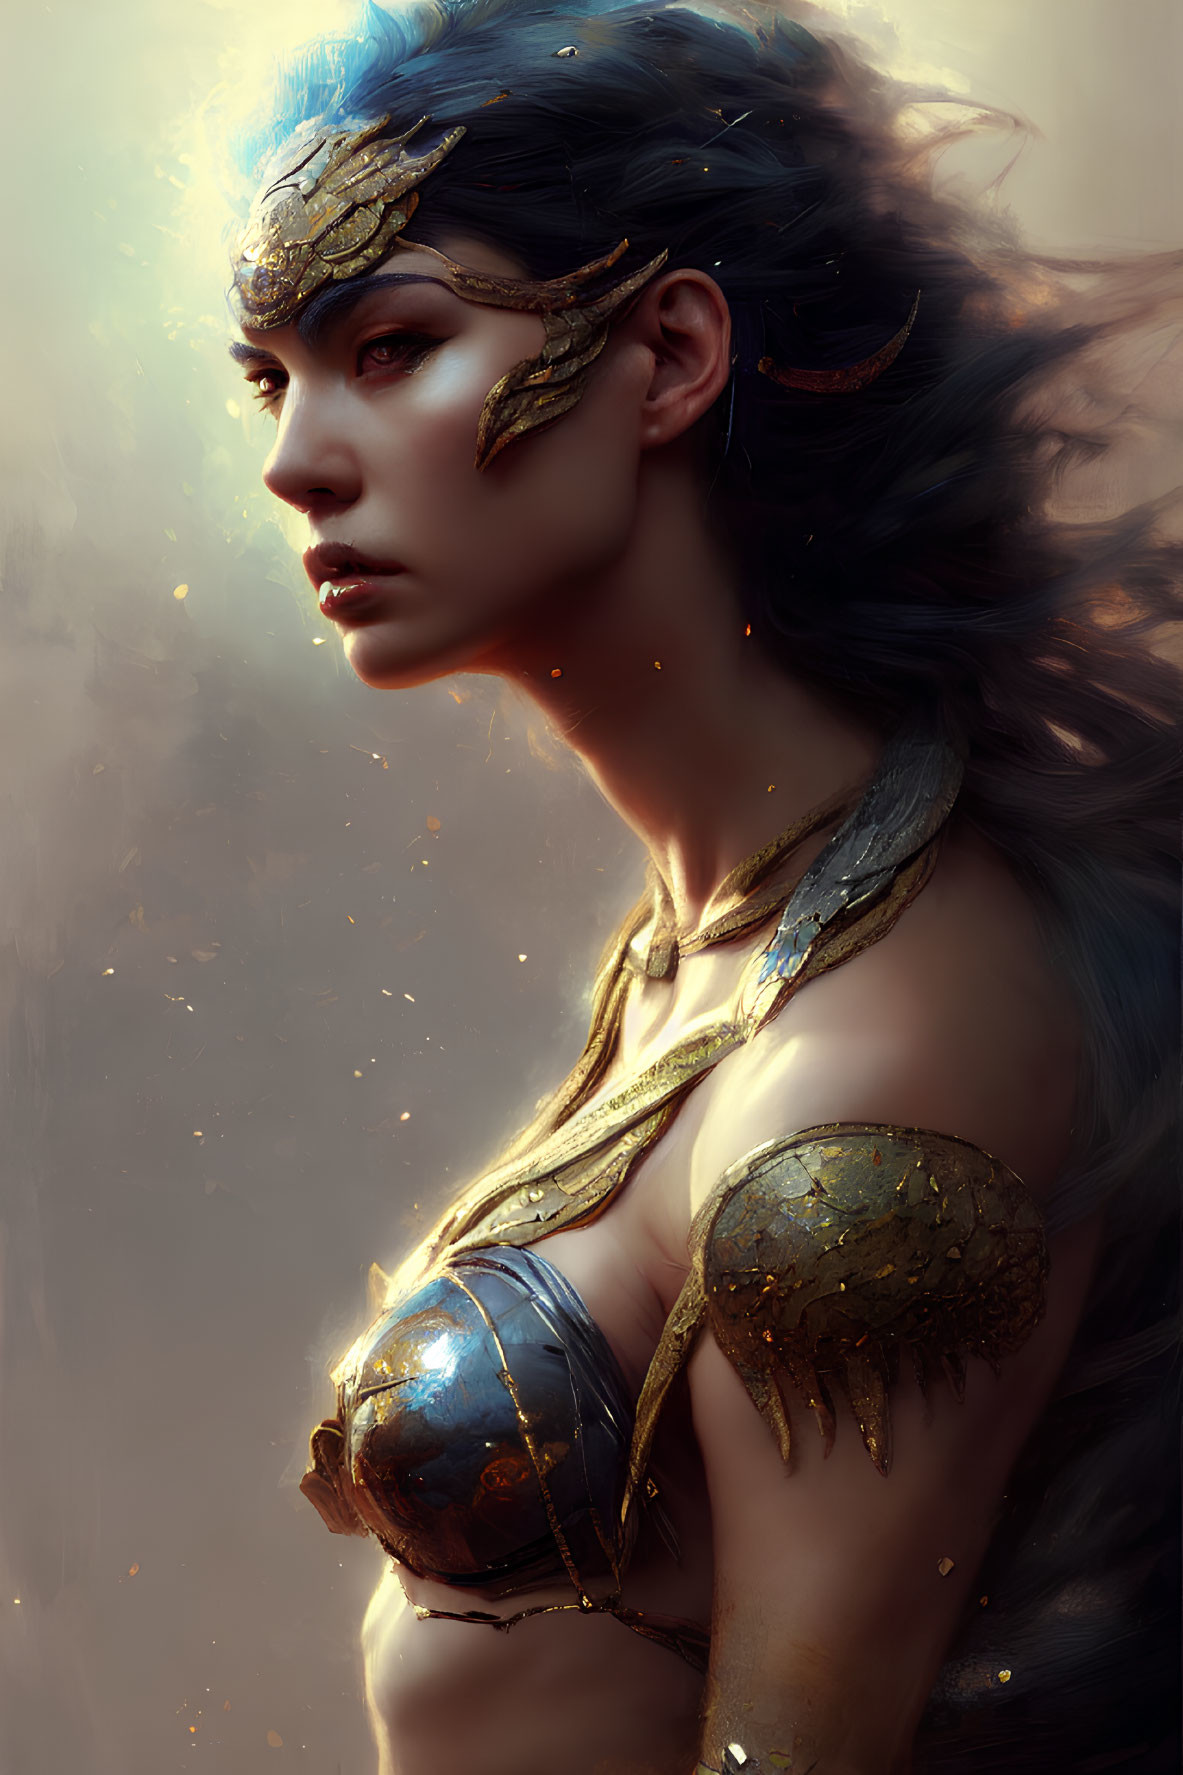 Regal female figure in gold and blue armor with winged helm, amidst glowing embers